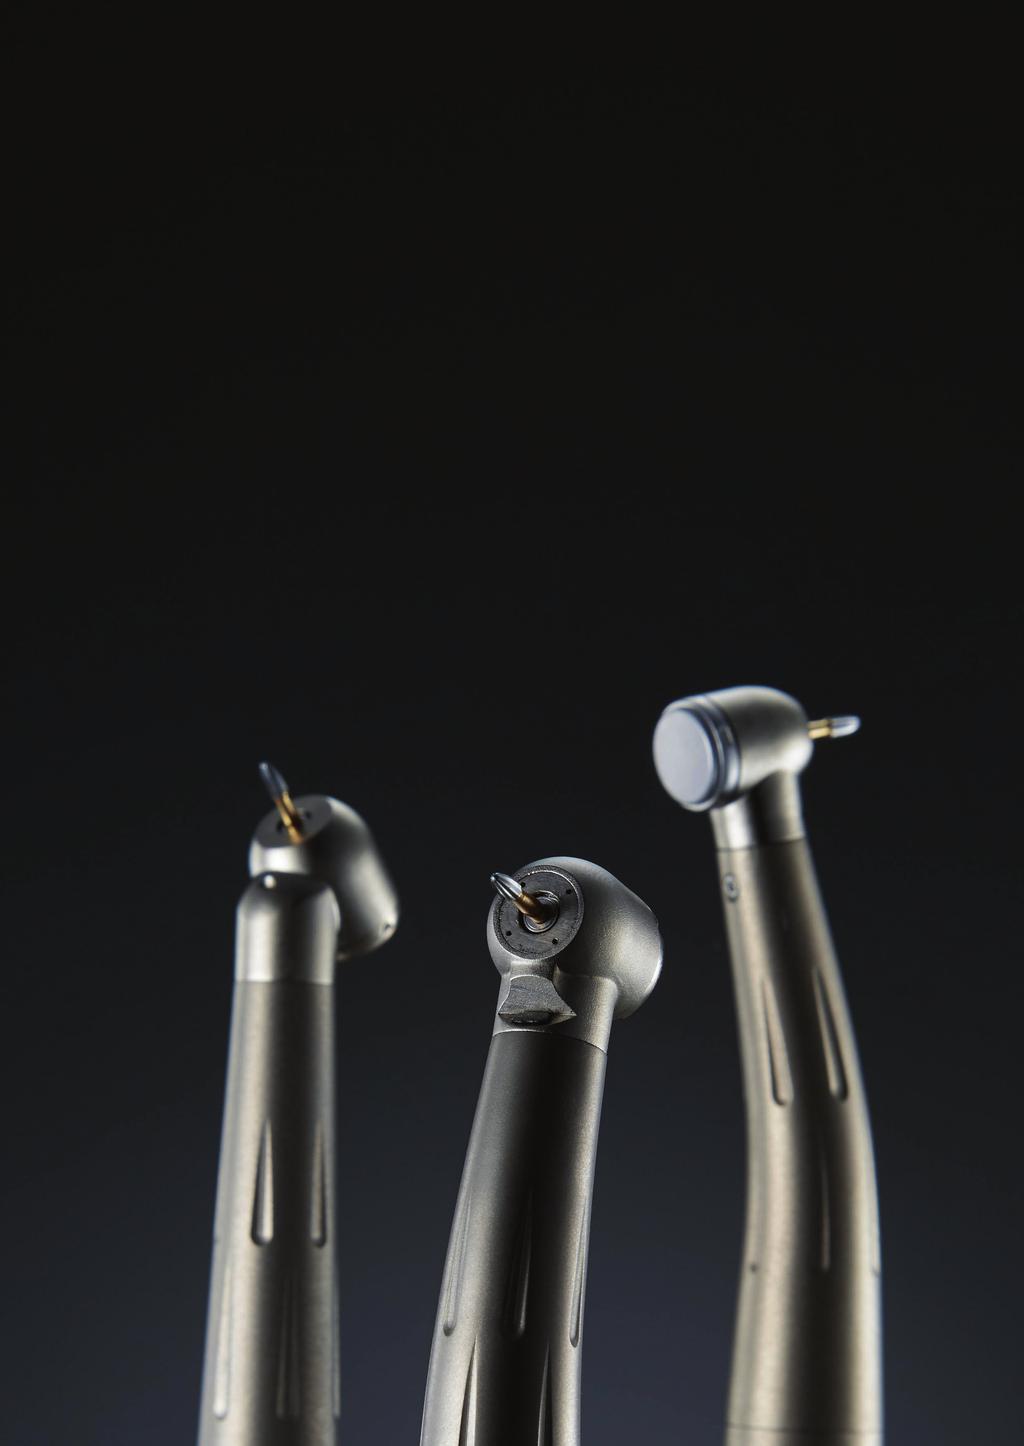 QUALITY CONTROL CERTIFICATIONS MDK Co., Ltd. is a manufacturer of precision dental handpieces in South Korea.